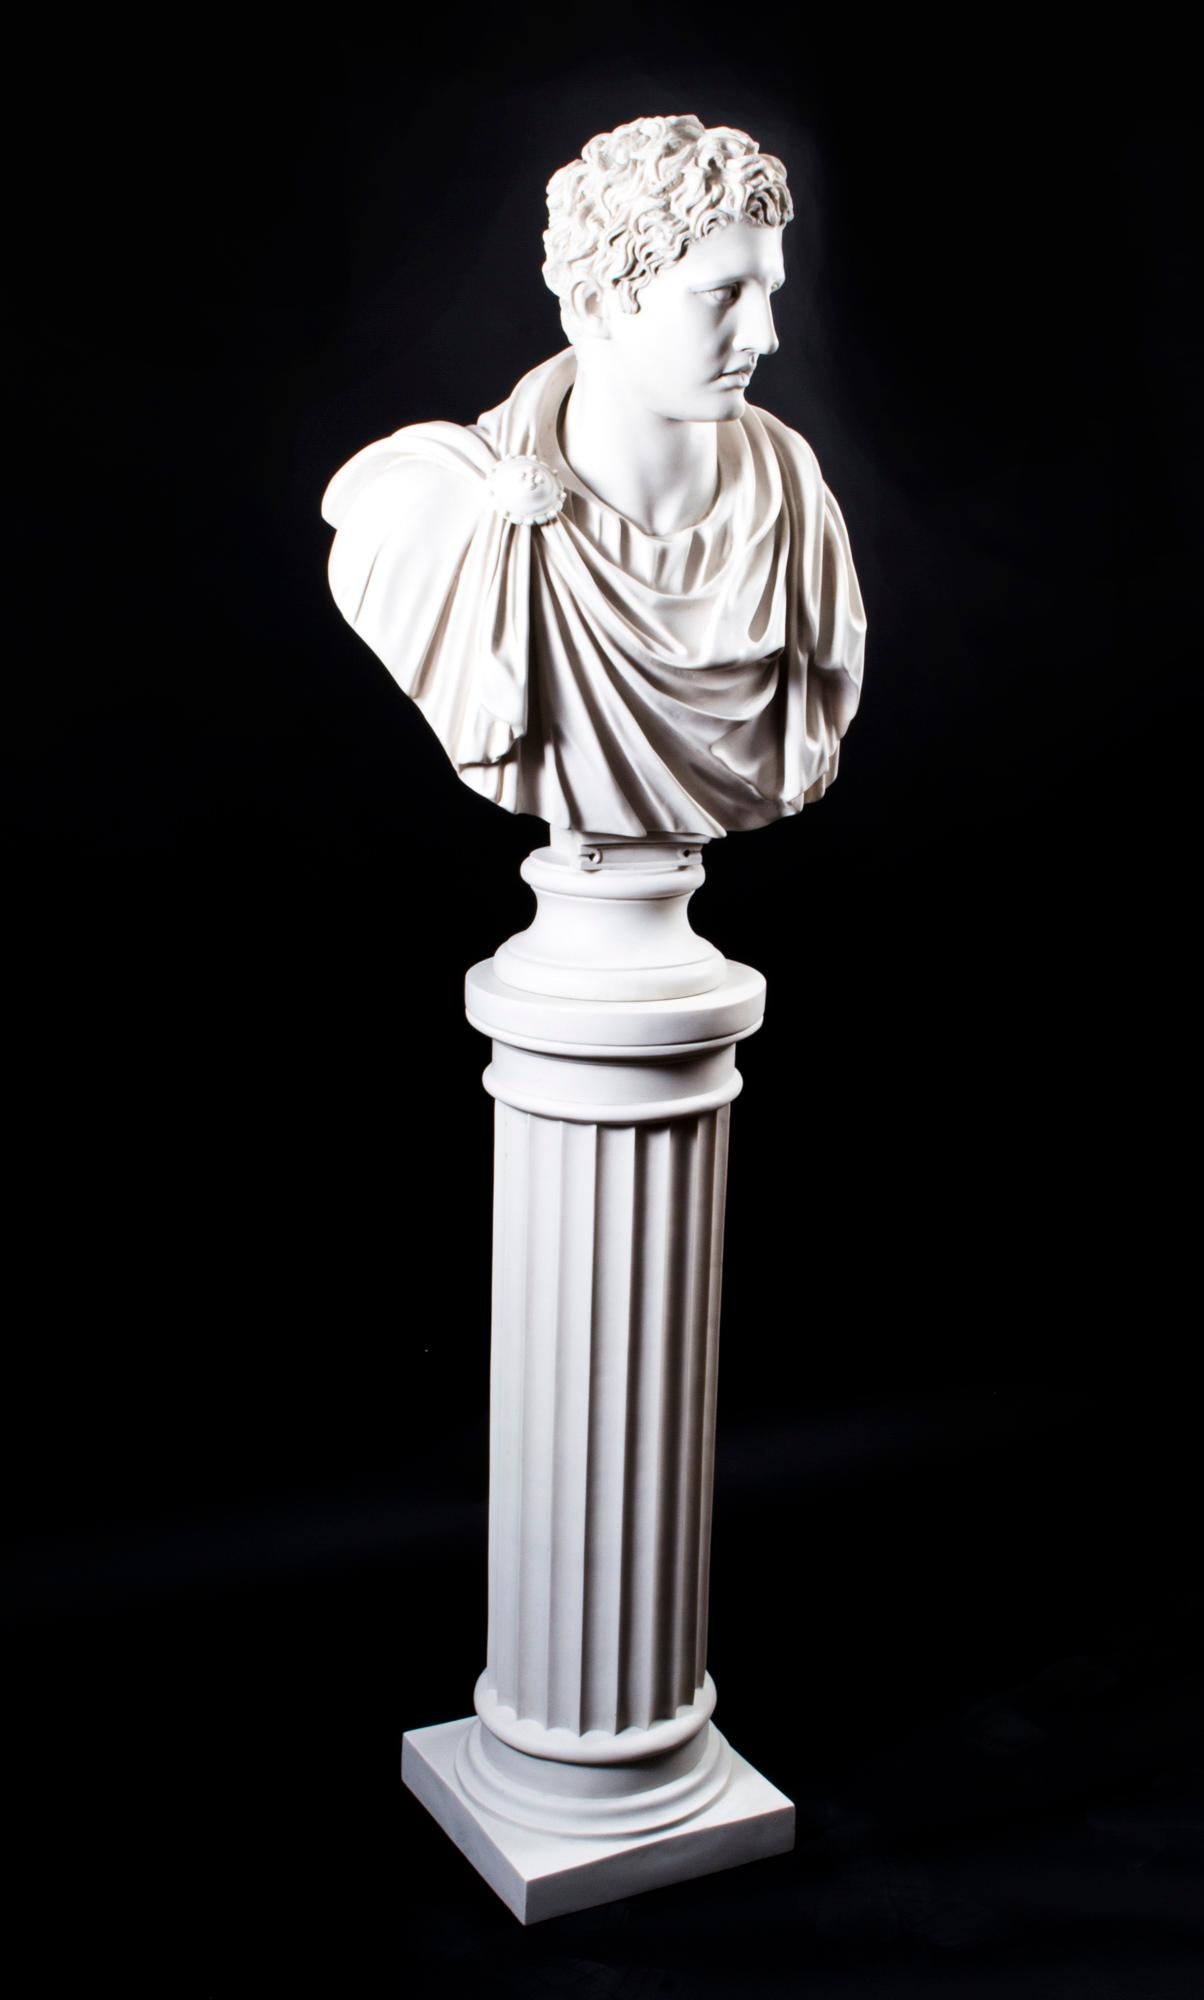 A beautifully sculpted marble bust of the famous Roman general and Emperor Marc Antony, wearing a flowing toga with a fibulae or broach holding it in place, on a matching elegant pedestal in the form of a classical ancient Greek Doric column. The